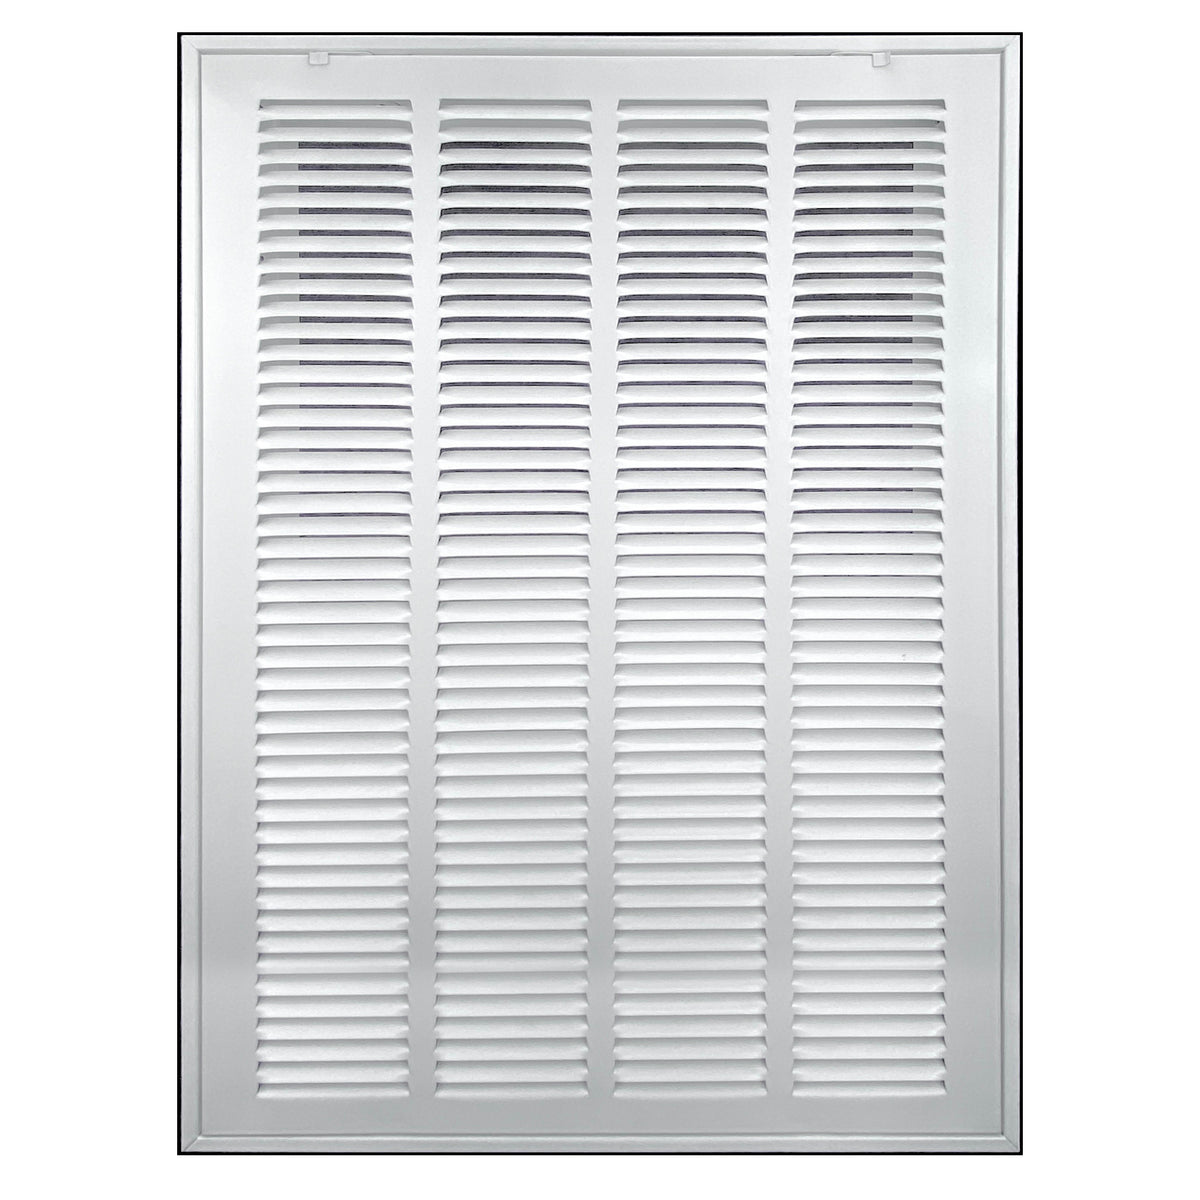 16" X 25" Duct Opening | Filter Included HD Steel Return Air Filter Grille for Sidewall and Ceiling